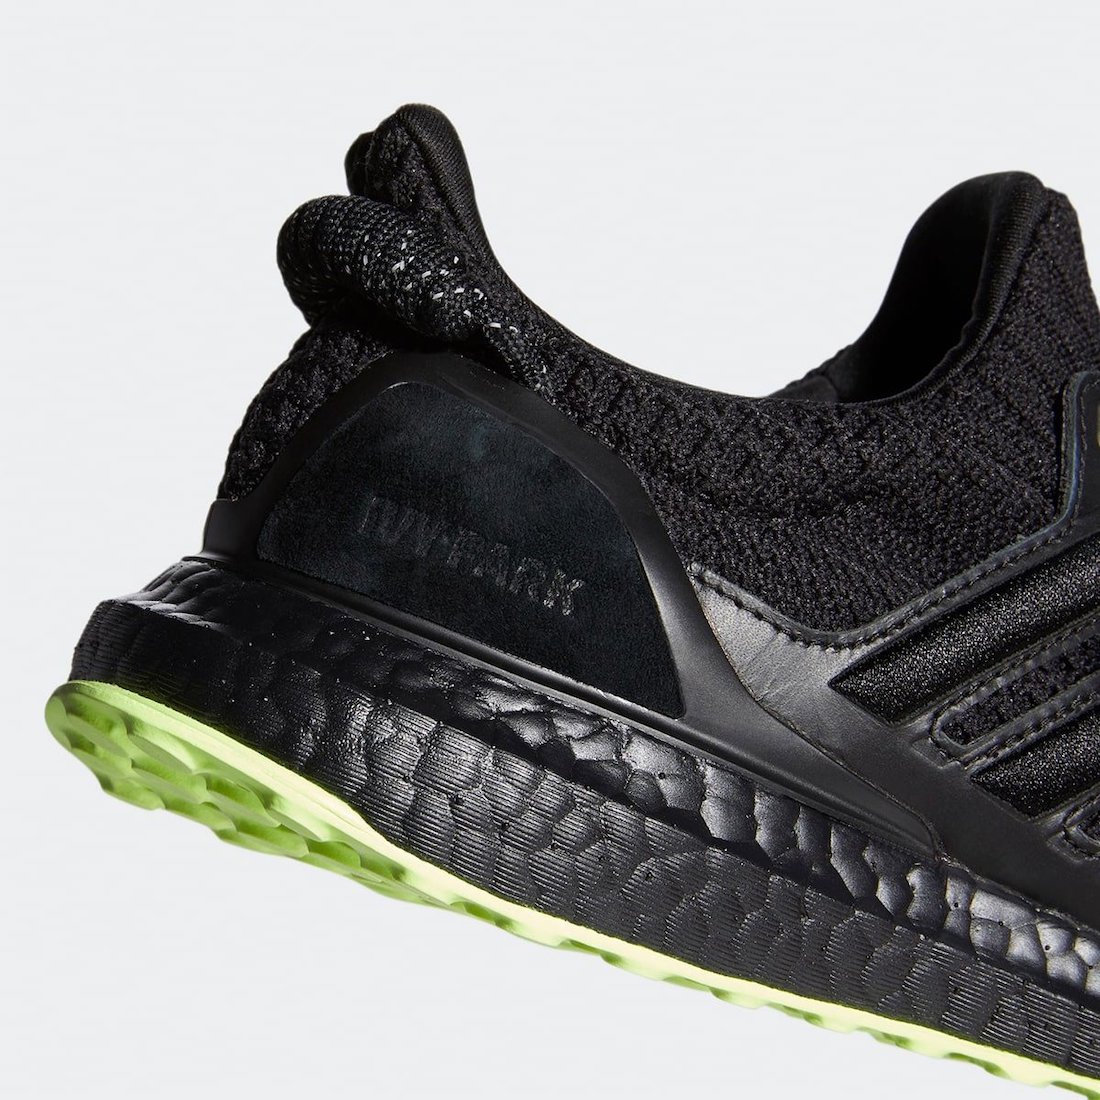 Beyonce Ivy Park adidas Ultra Boost Black GX0200 Release Date - SBD